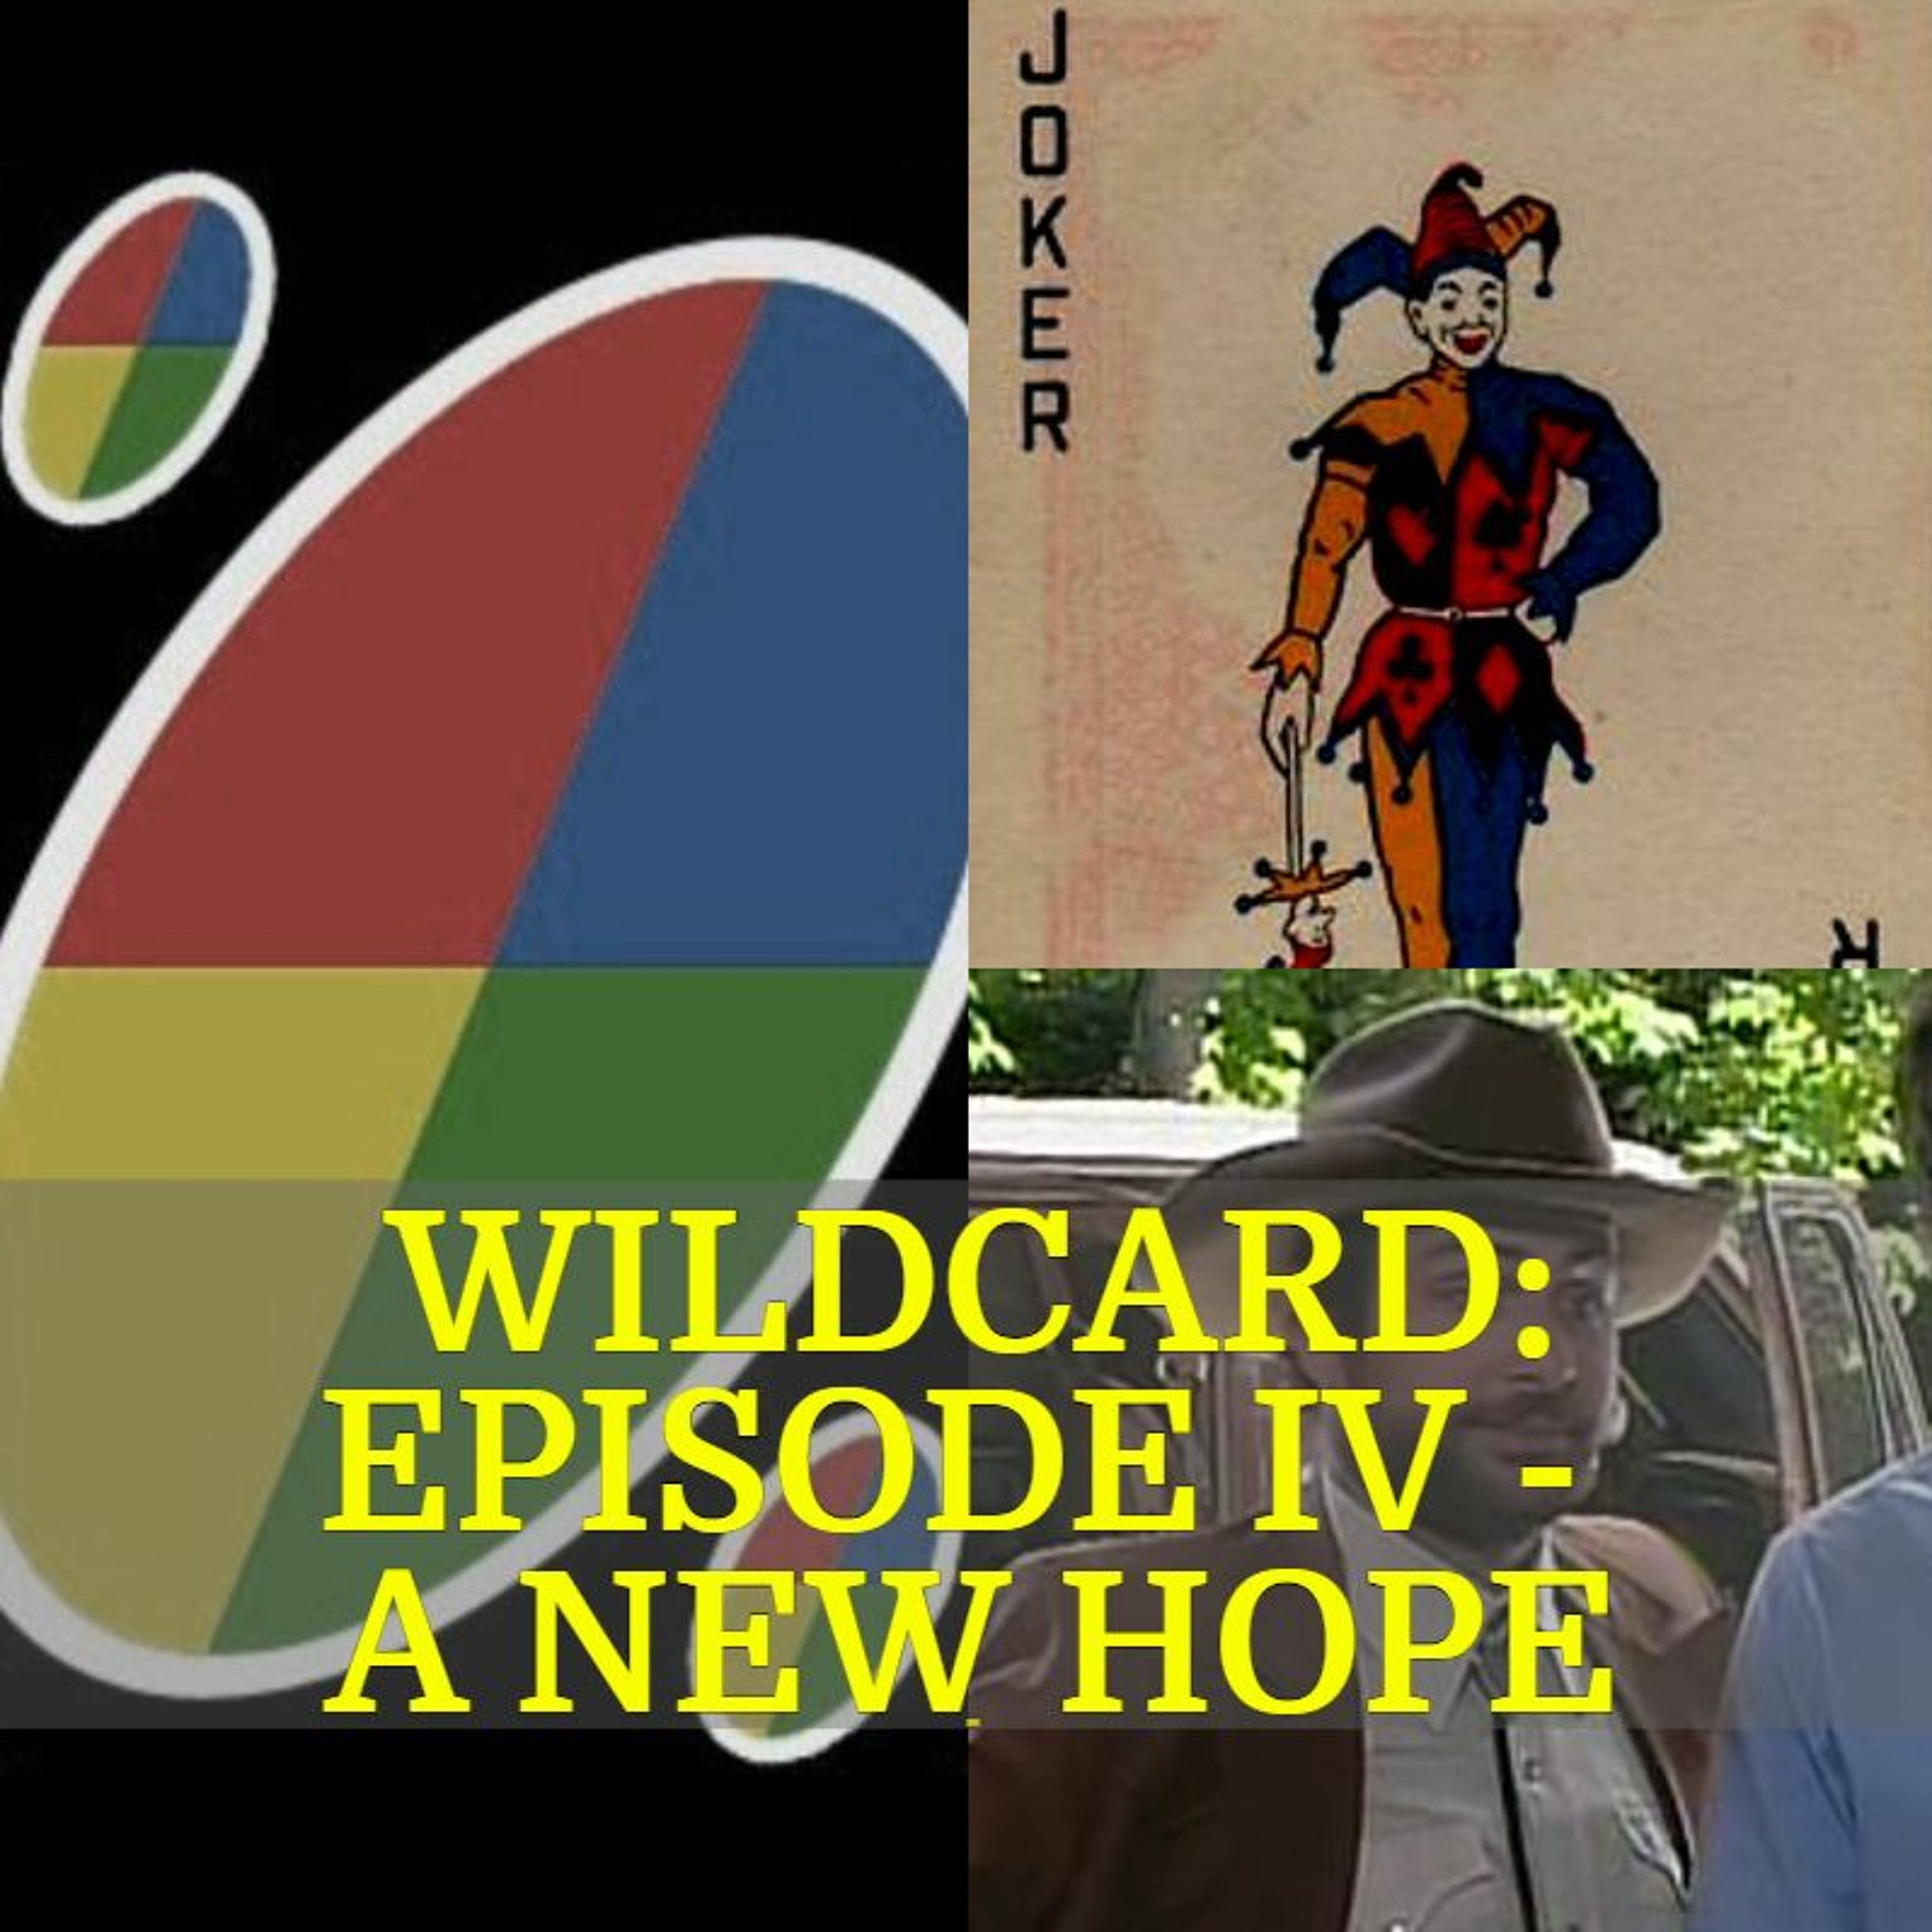 056 - Wildcard: Episode IV - A New Hope